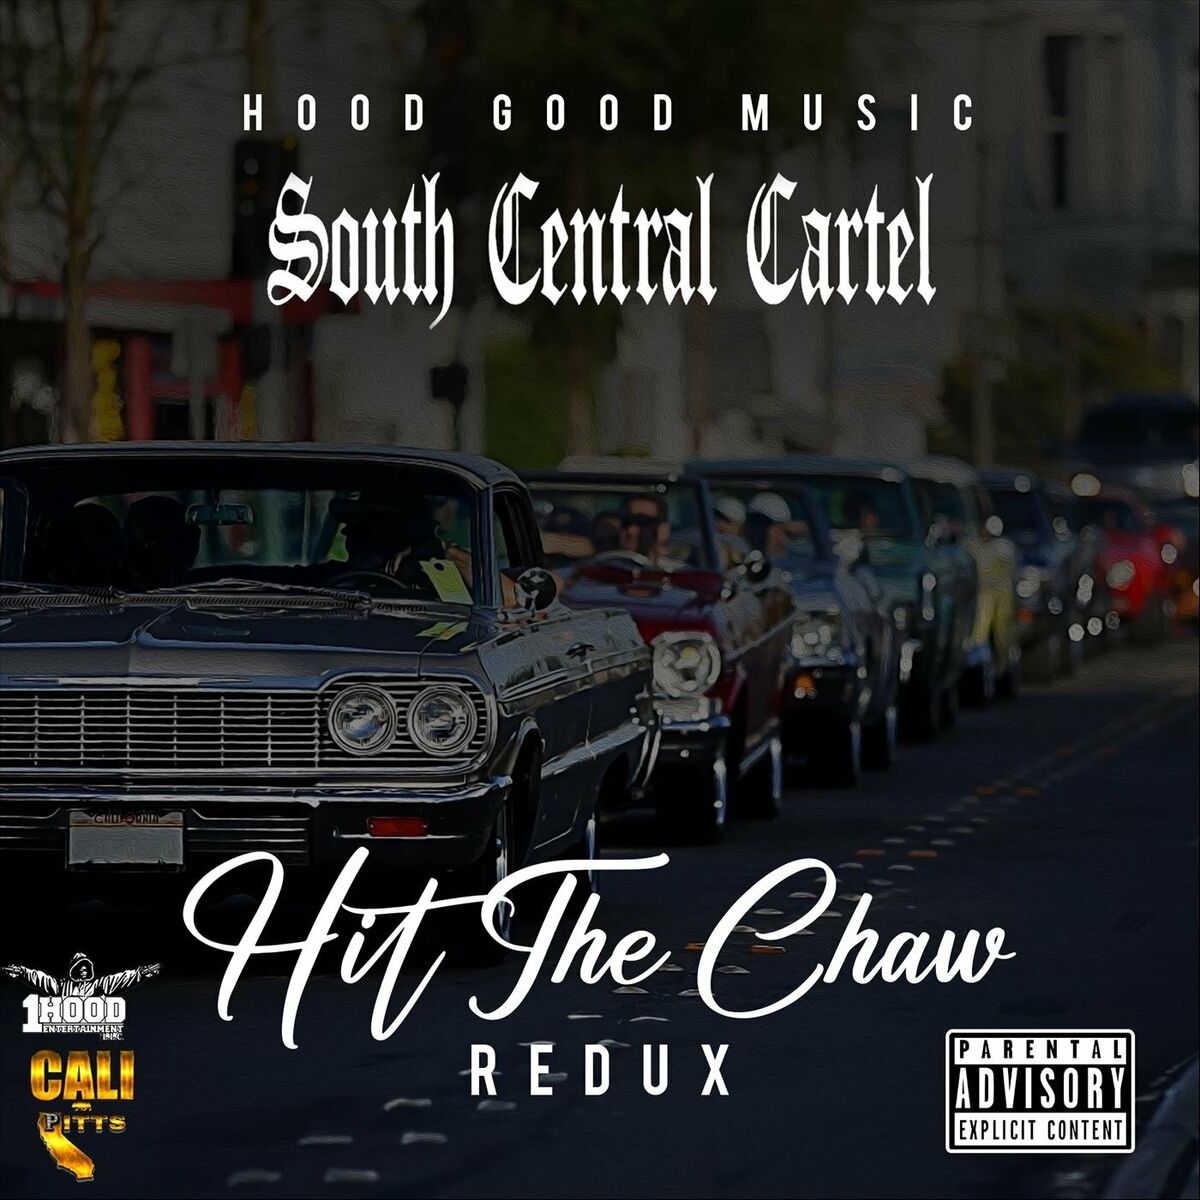 South Central Cartel: albums, songs, playlists | Listen on Deezer